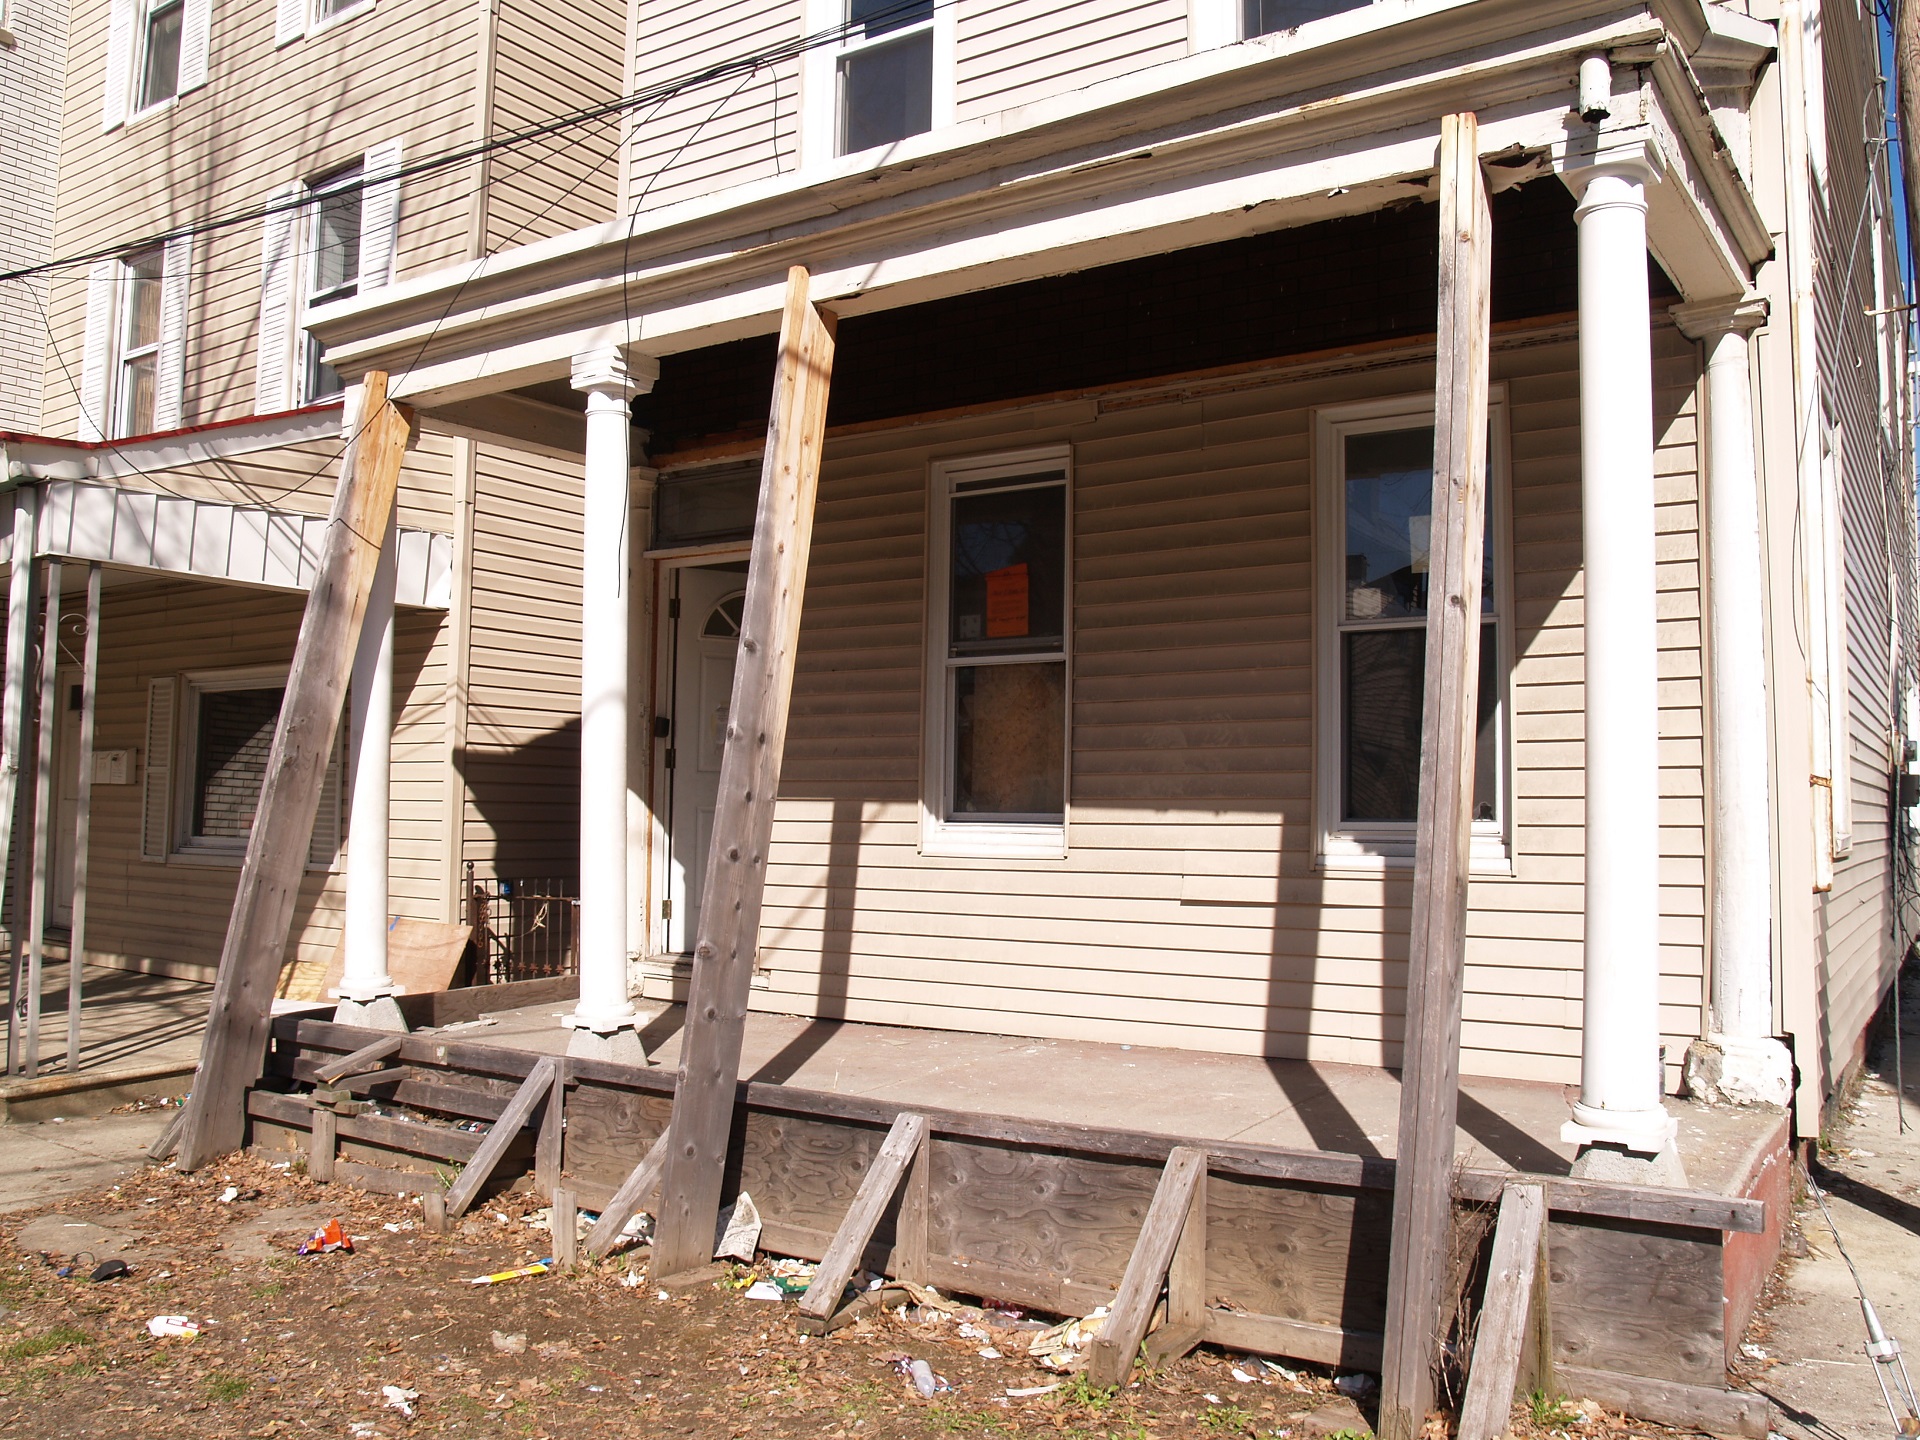 Condemned Houses: How to Sell an Unlivable Property for Cash